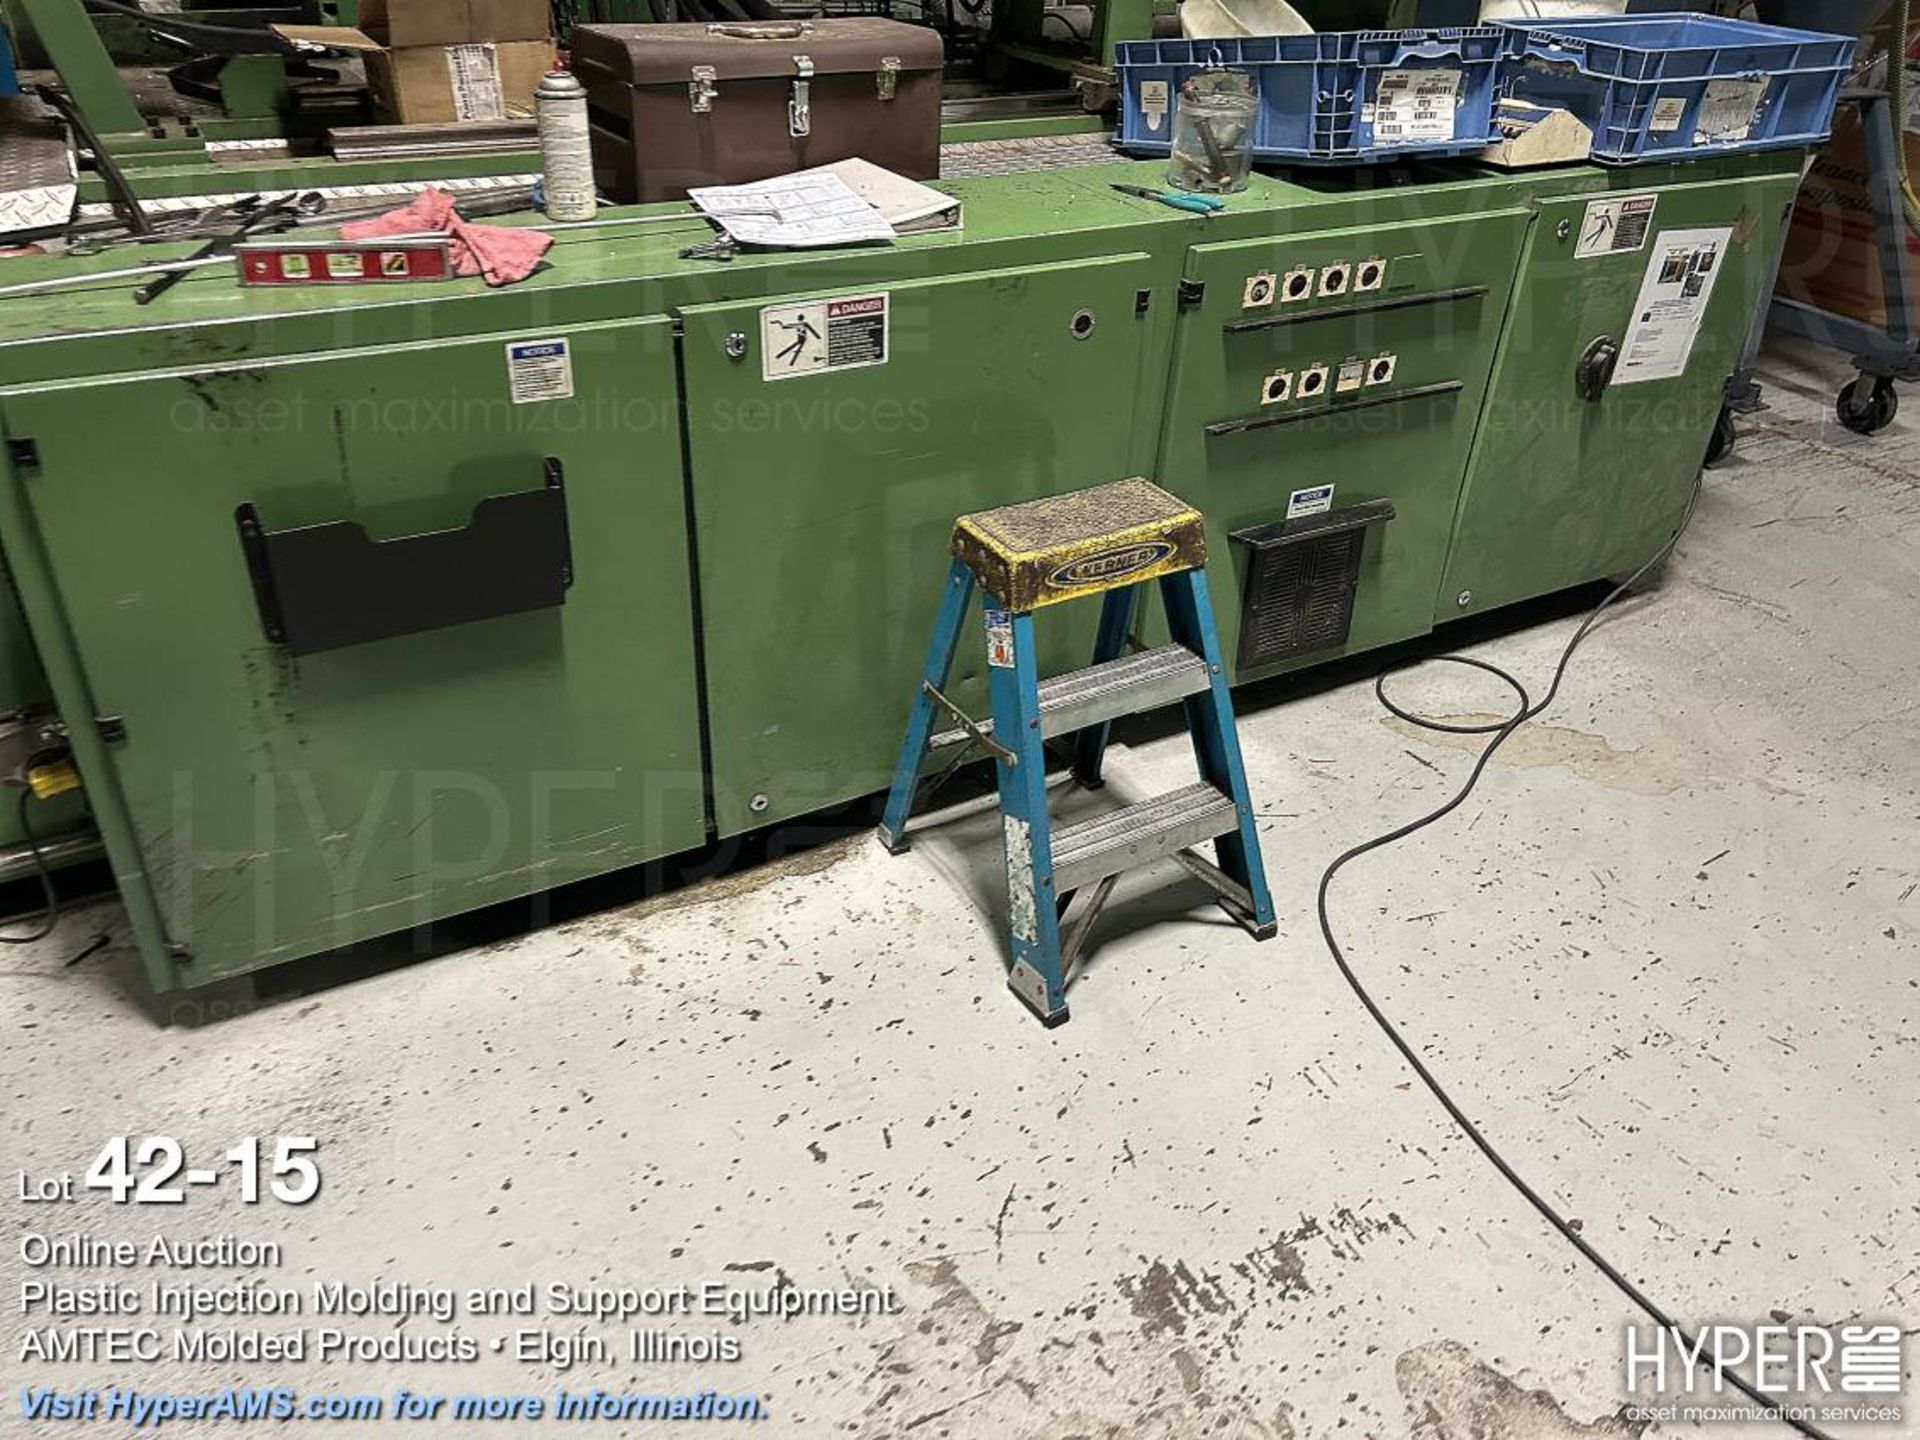 Engel ES2050/400AH toggle clamp plastic injection molding machine - Image 15 of 28